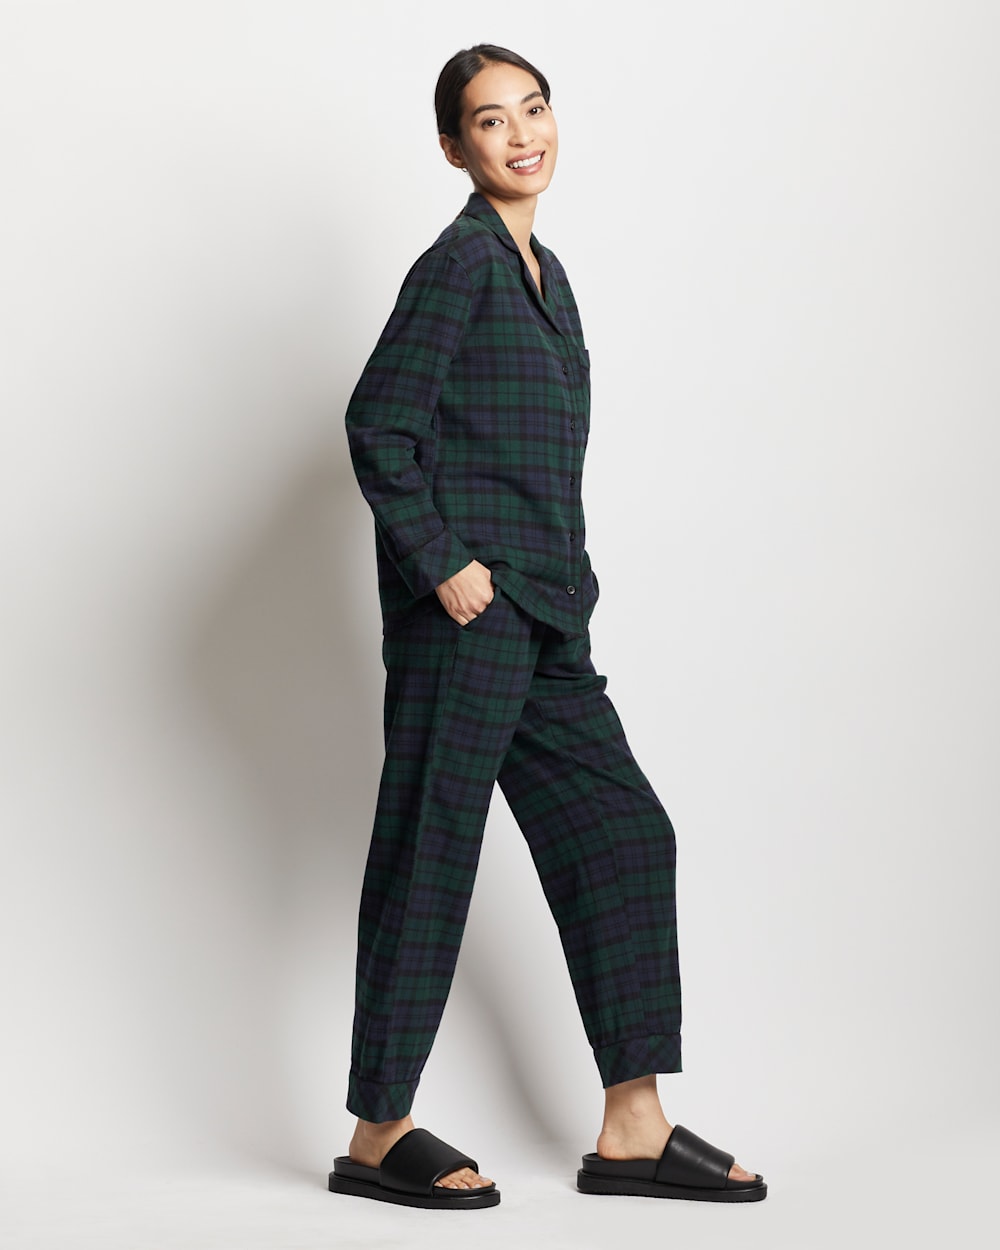 ALTERNATE VIEW OF WOMEN'S PAJAMA SET IN GREEN/BLUE PLAID image number 3